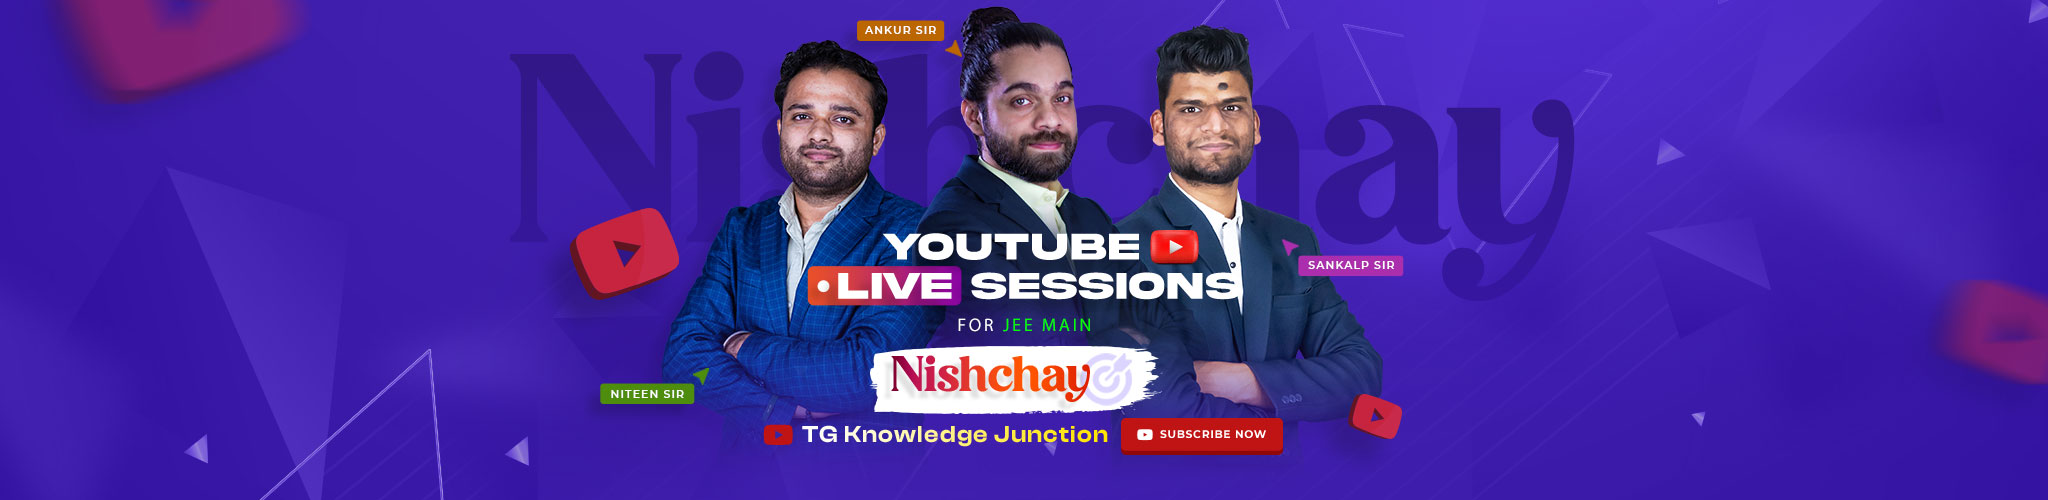 YouTube Live Session For JEE Mains